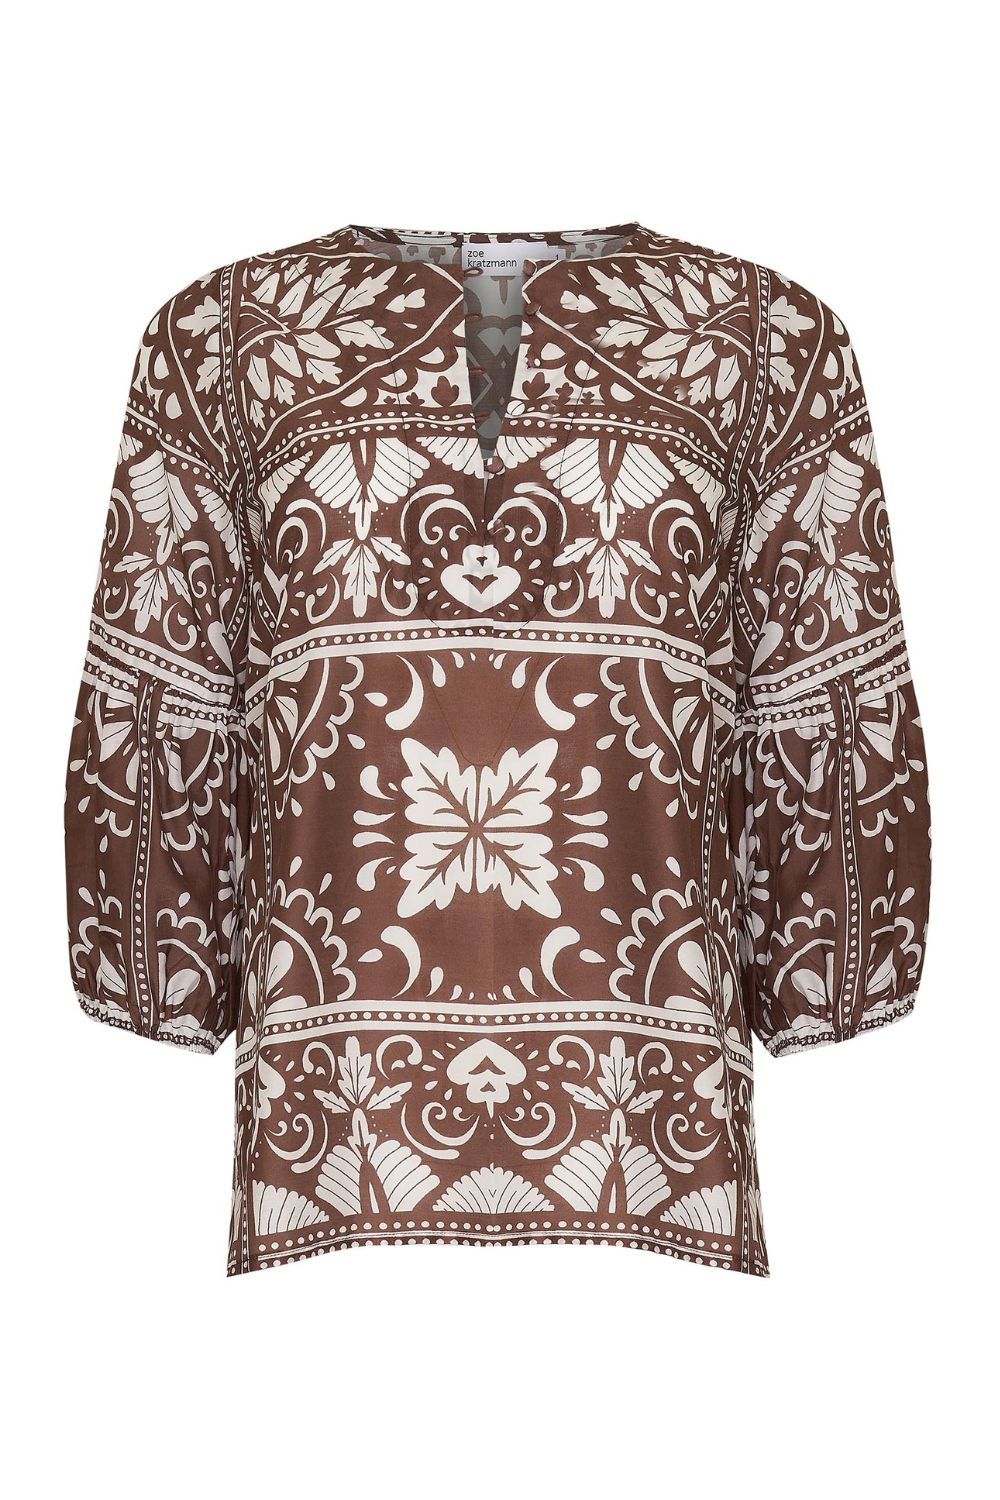 brown and white print, rounded neckline, mid length sleeve, product image